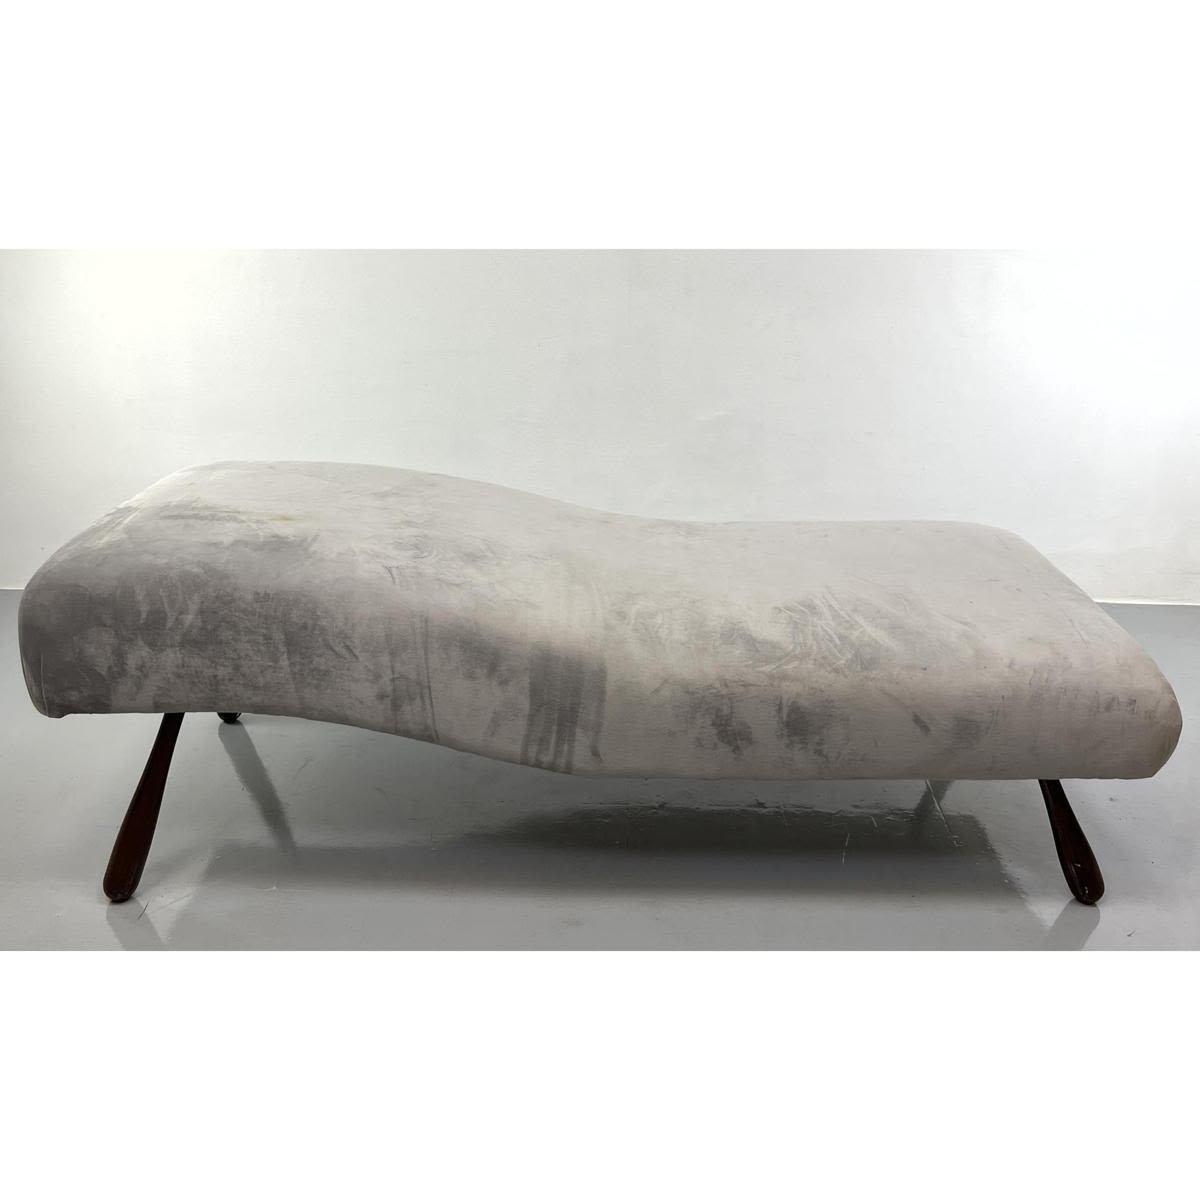 Jean Royere Style Fainting Sofa Daybed.